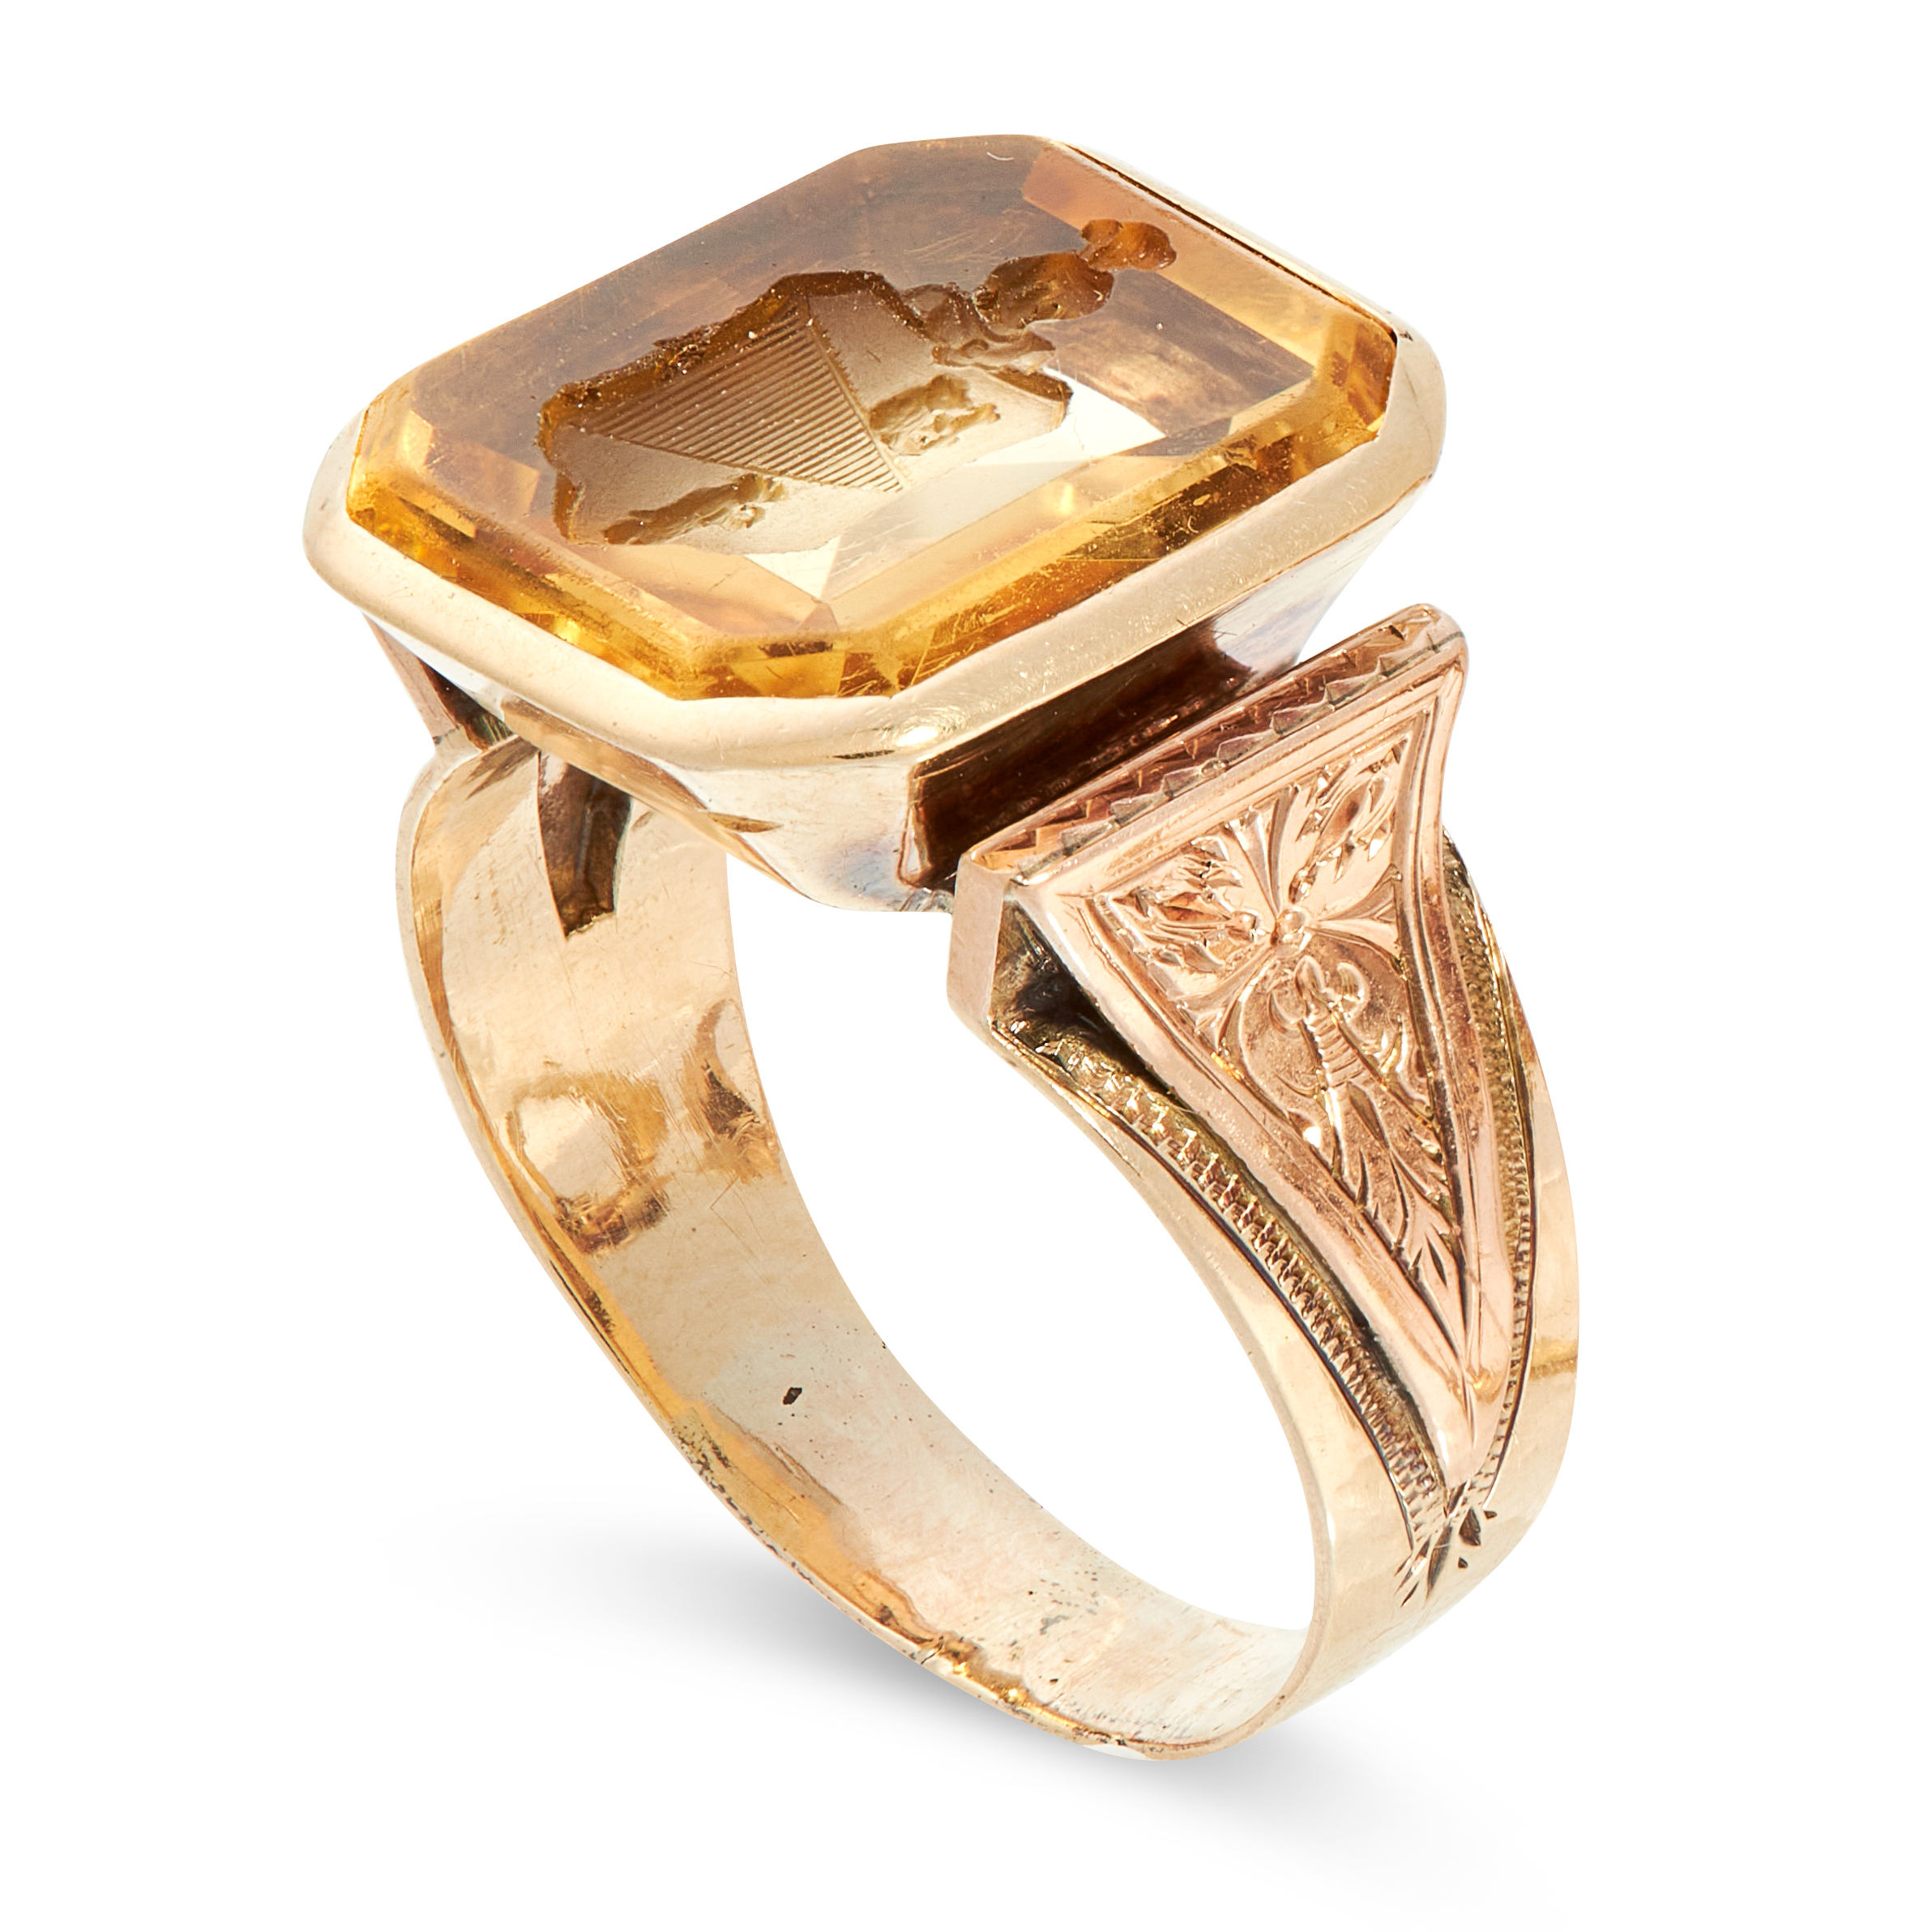 AN ANTIQUE CITRINE INTAGLIO SEAL RING in yellow gold, set with an emerald cut citrine, the face - Image 2 of 2